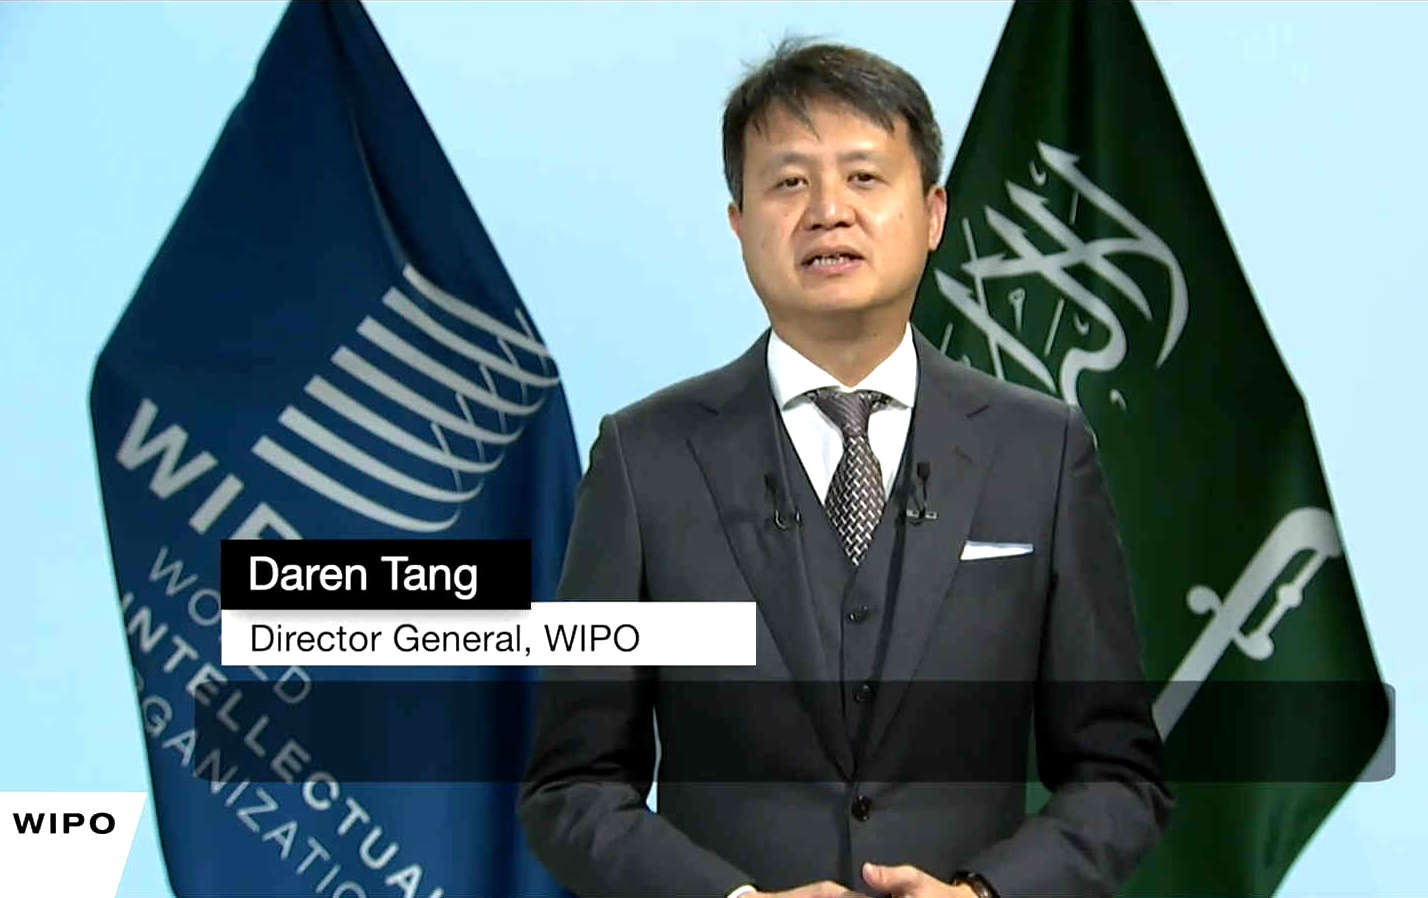 Darren Tang, Chief Executive of the World Intellectual Property Office - the home of ripping off inventors - to help corporations steal ideas - allegedly.